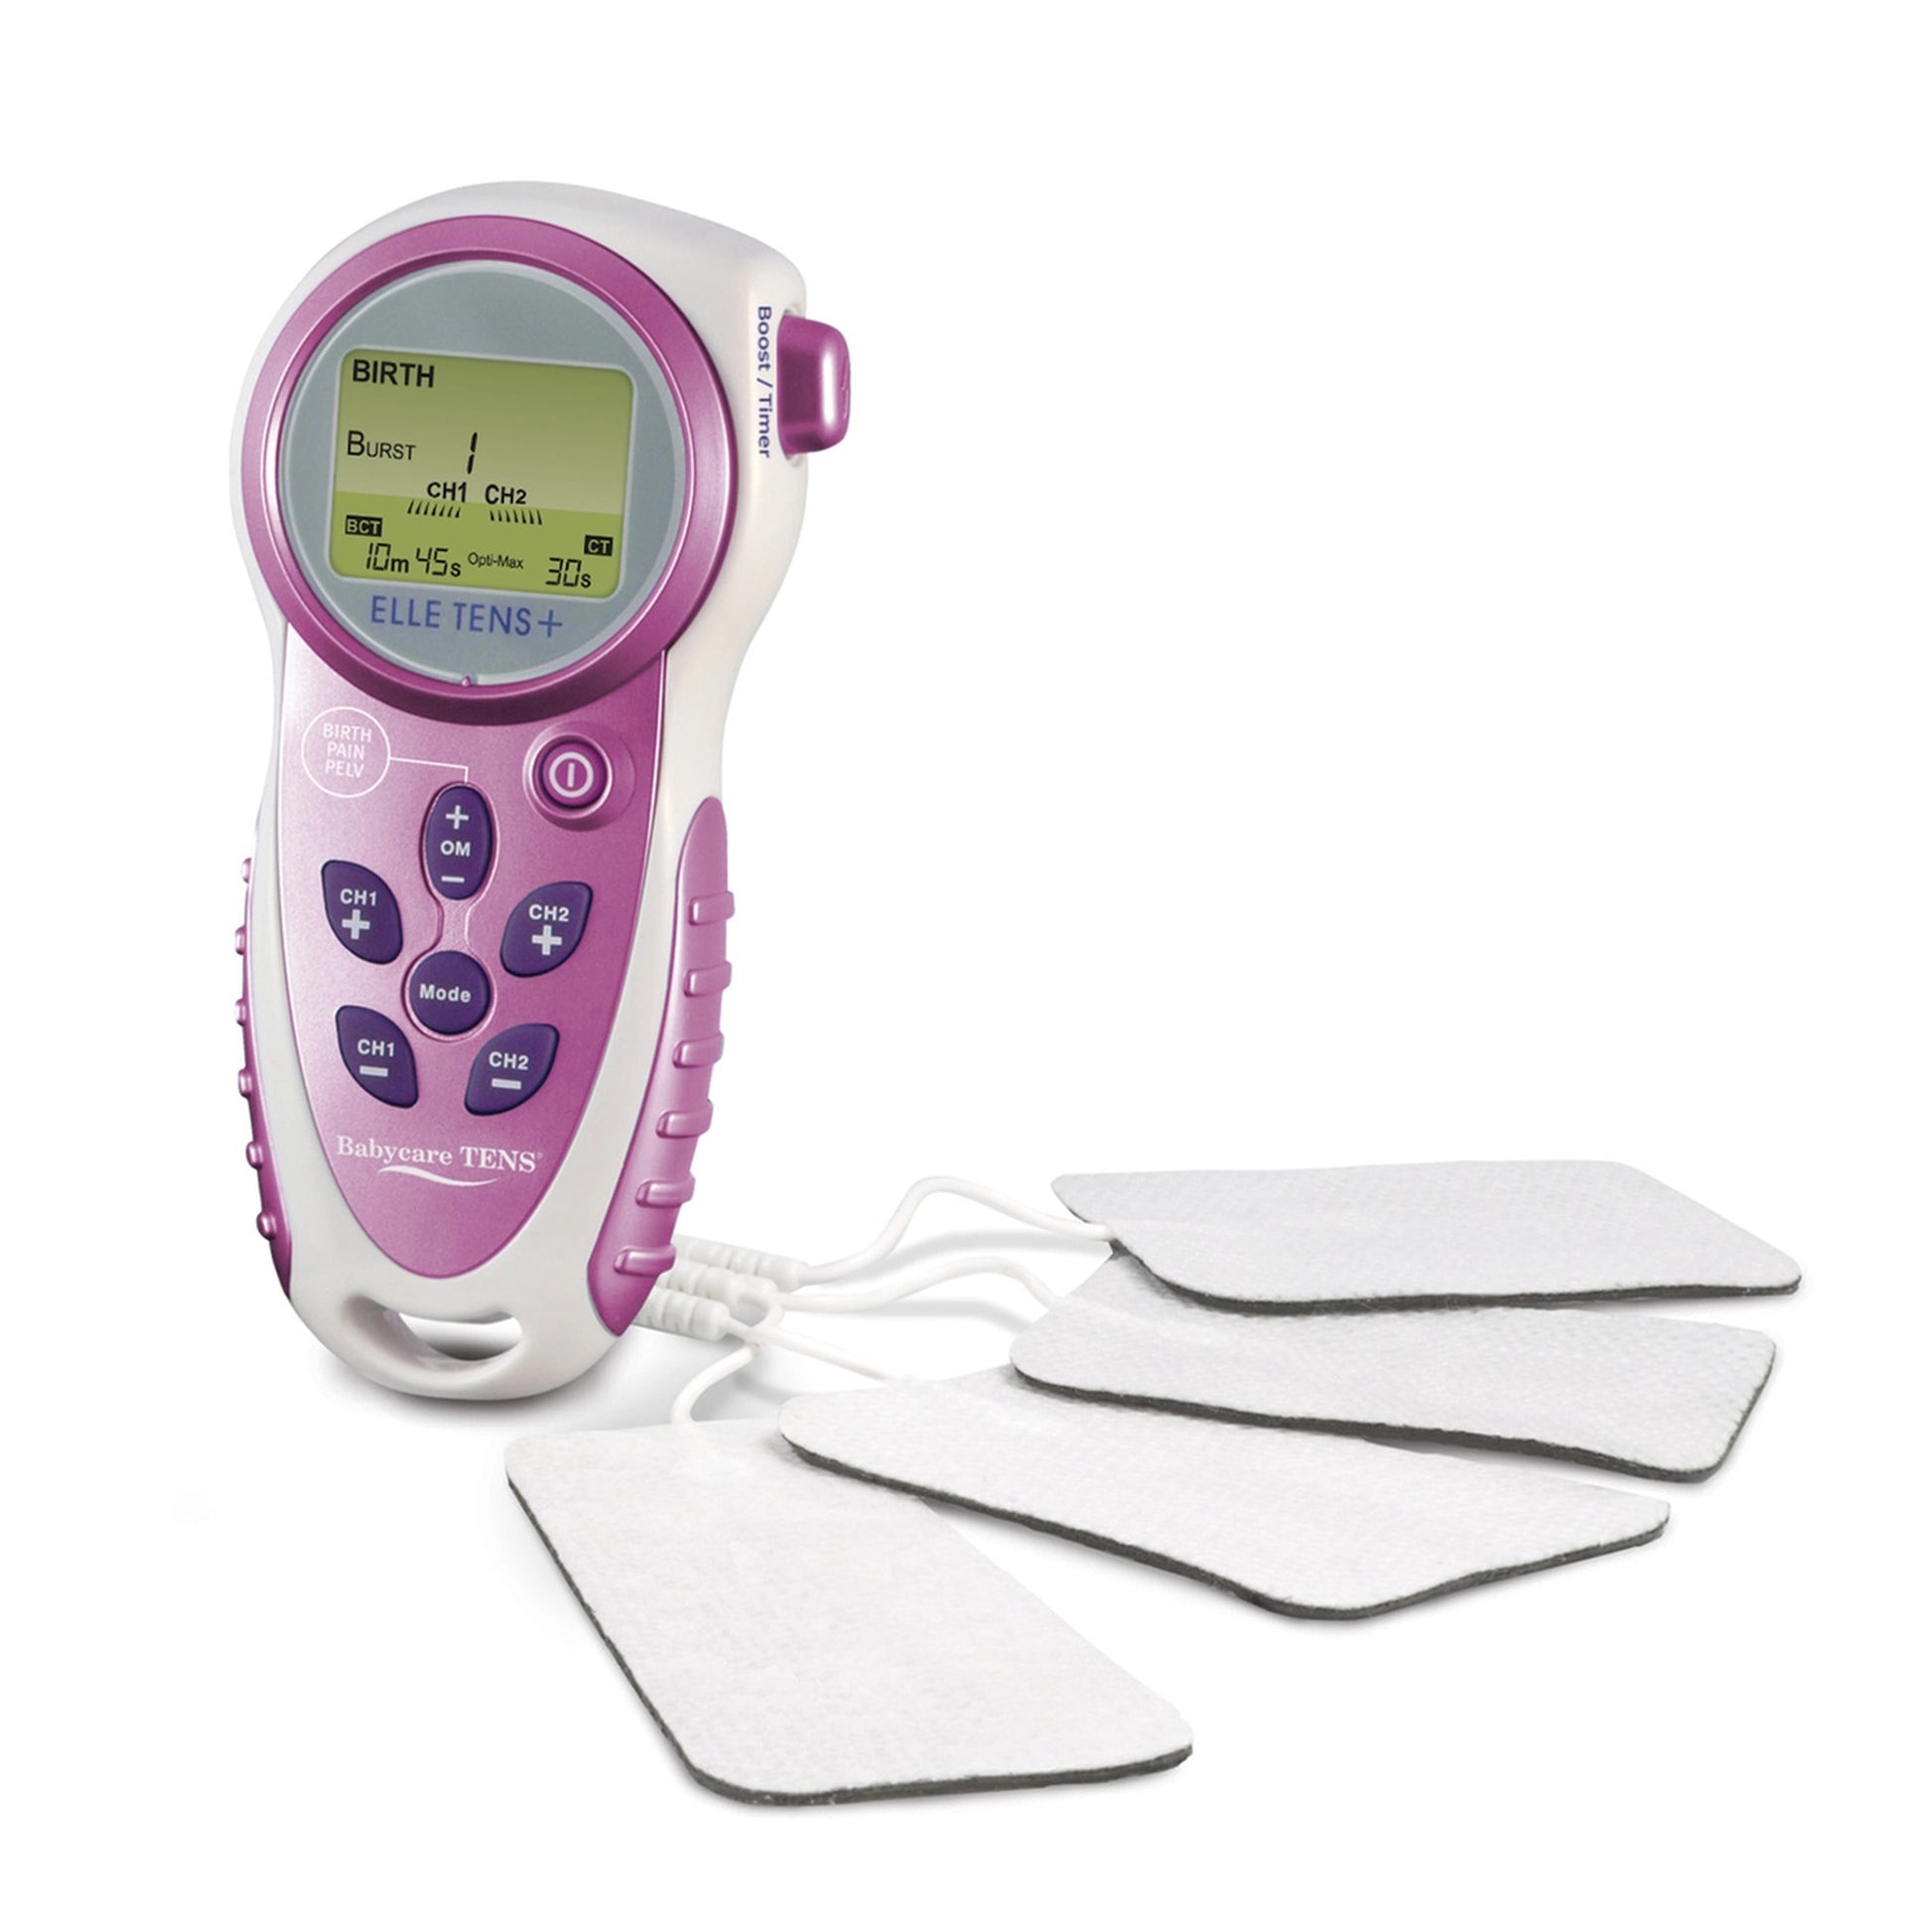 Image of Babycare Elle Tens plus + machine with electrodes attached. Display shows burst mode function